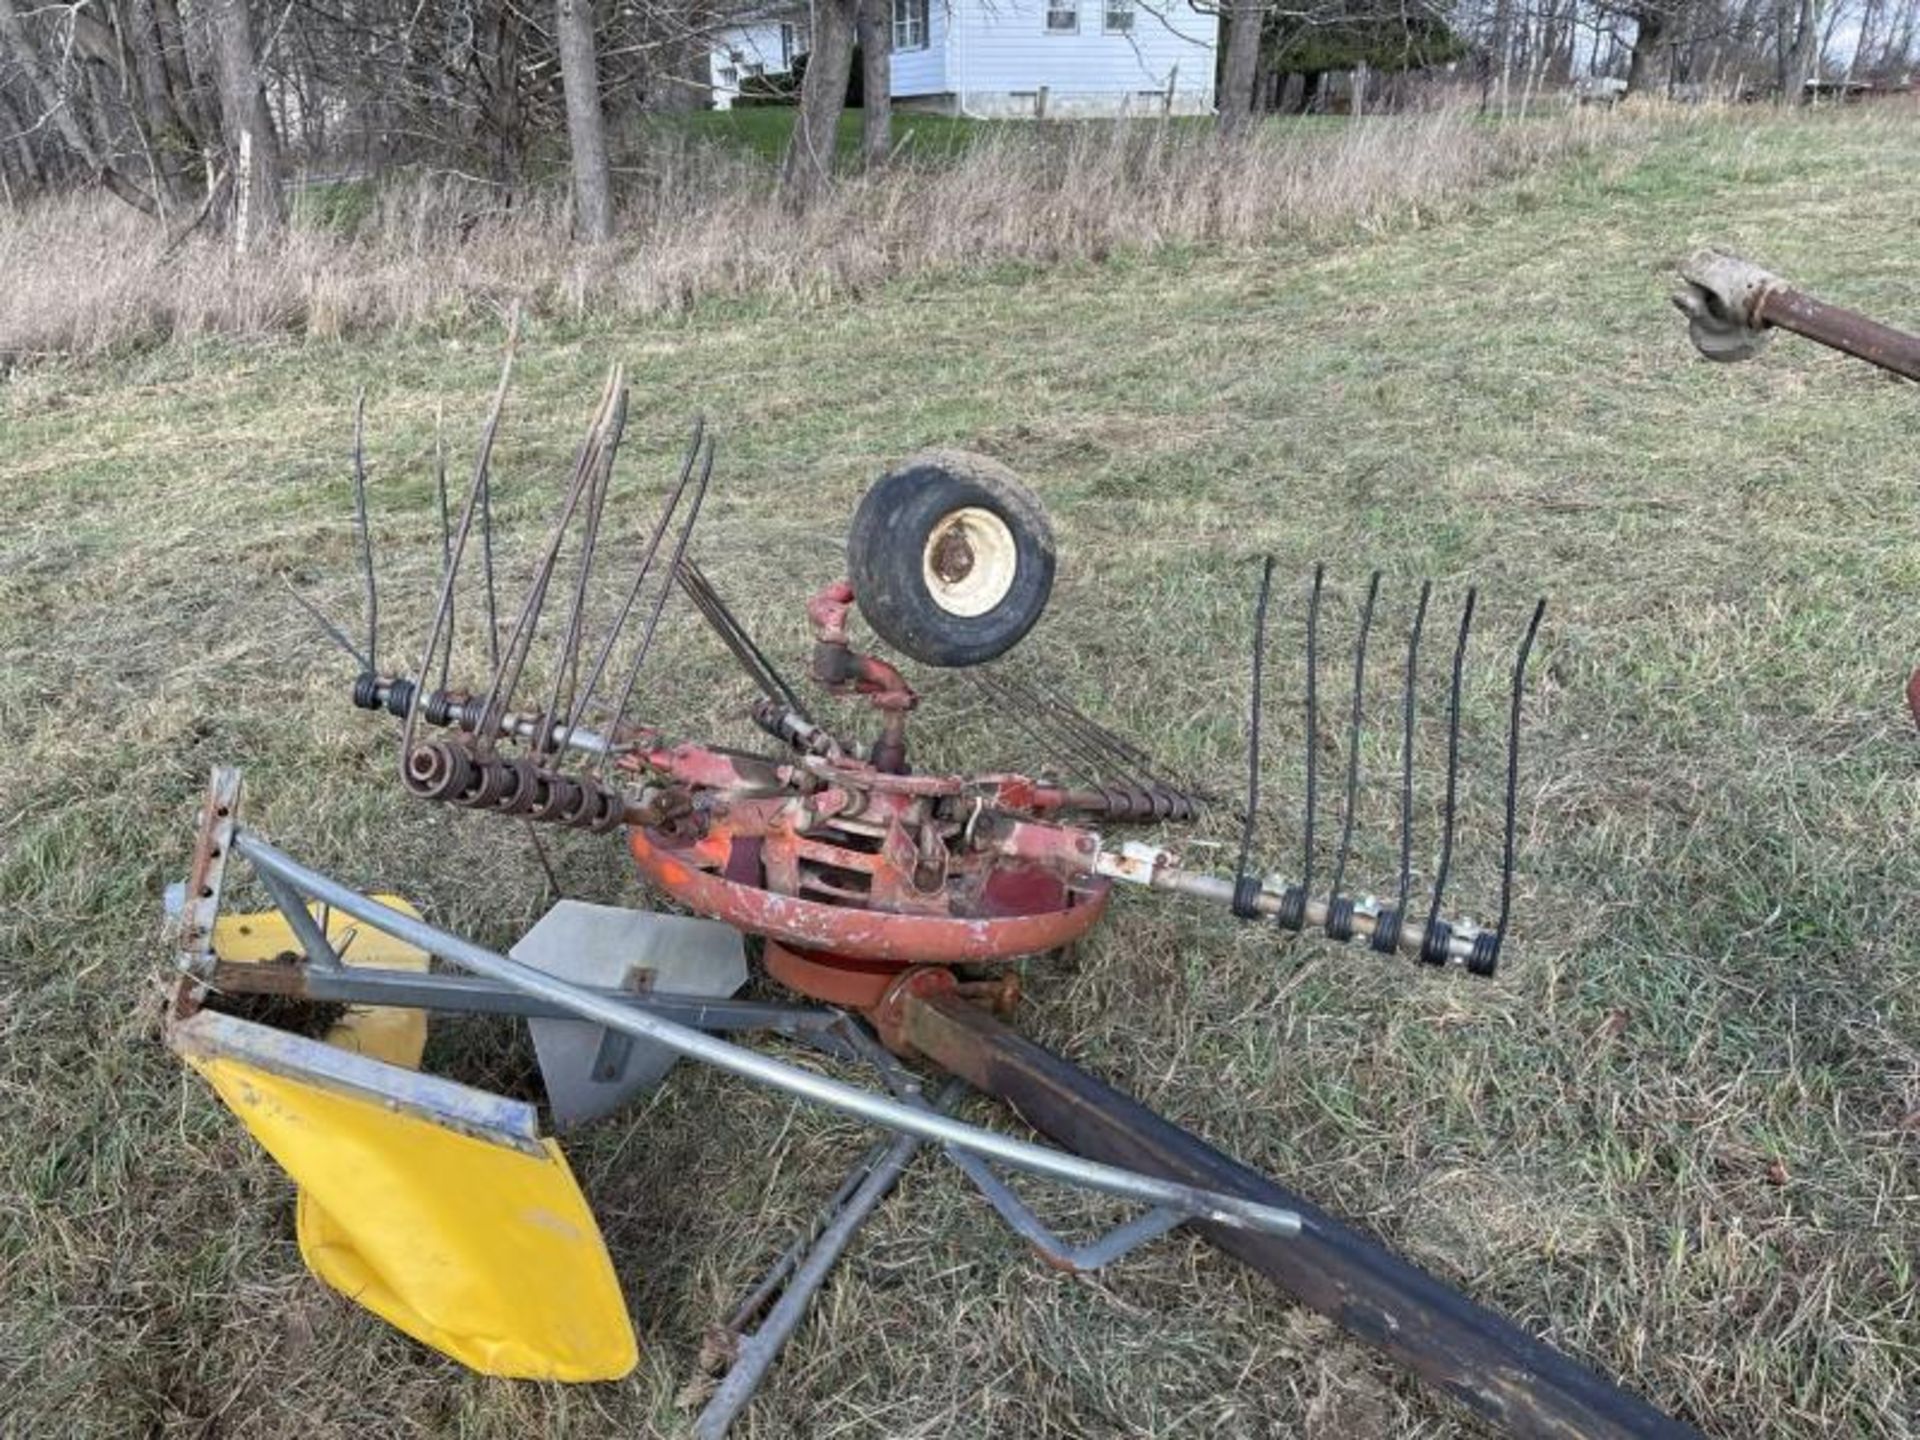 New Idea Rake Tedder, 3 Point Hitch PTO in 2 PartsParts - Image 5 of 7